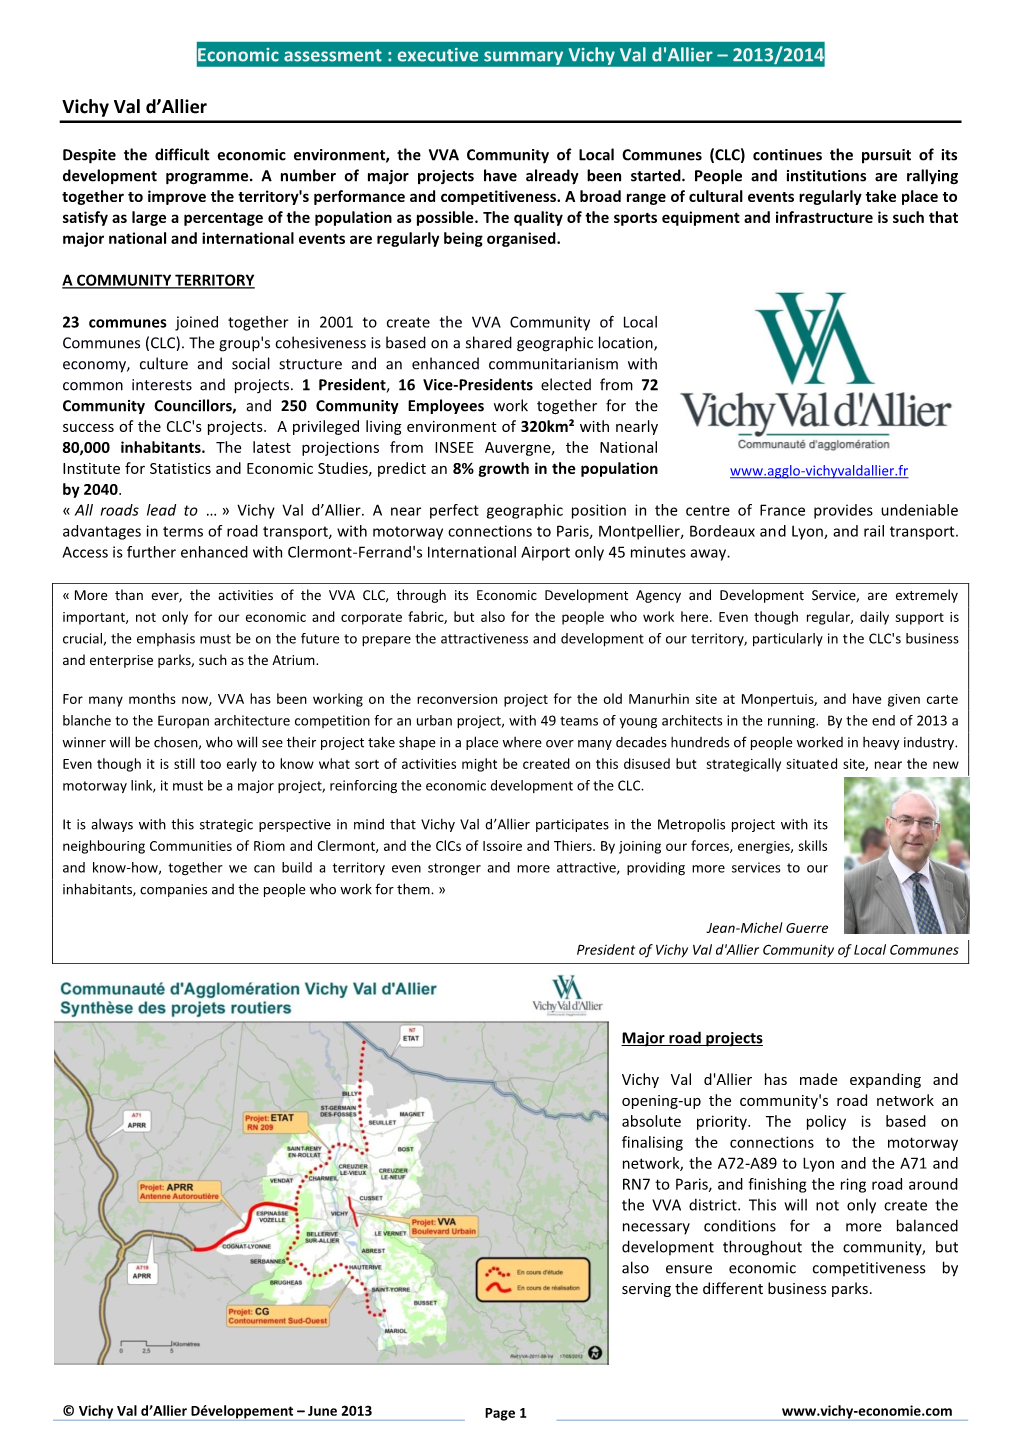 Economic Assessment : Executive Summary Vichy Val D'allier – 2013/2014